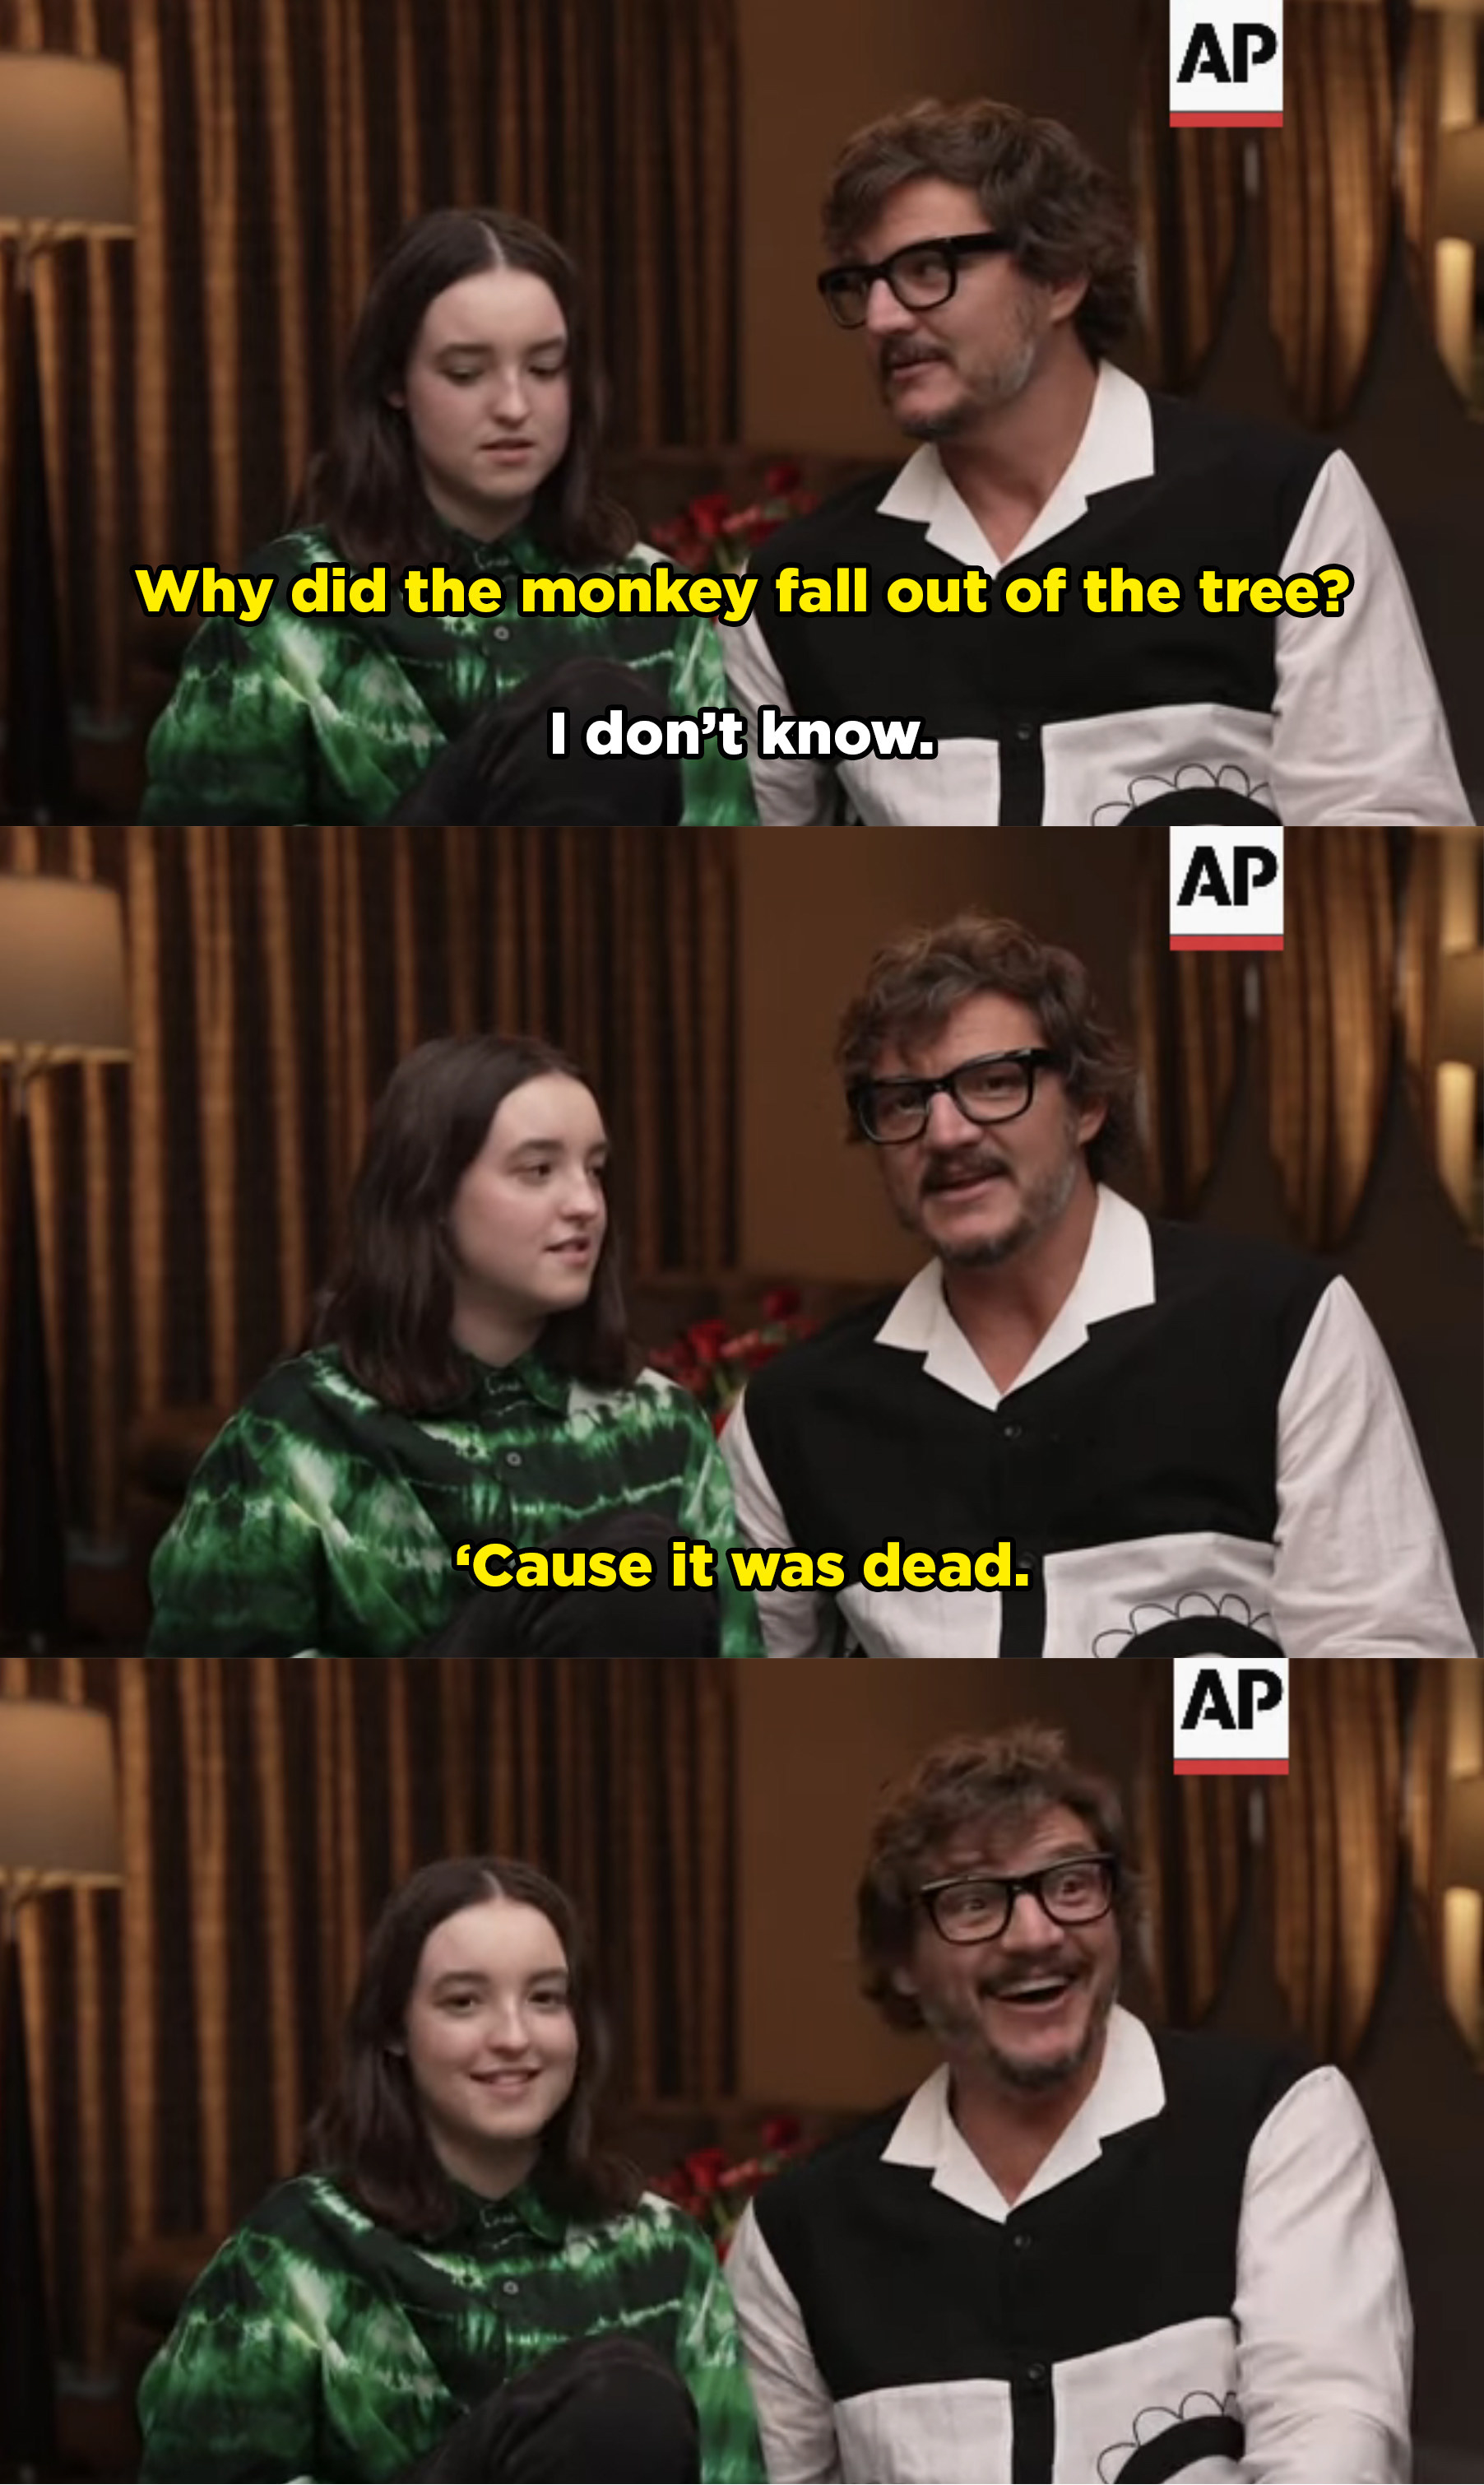 why did the monkey fall out of the tree? &#x27;cause it was dead